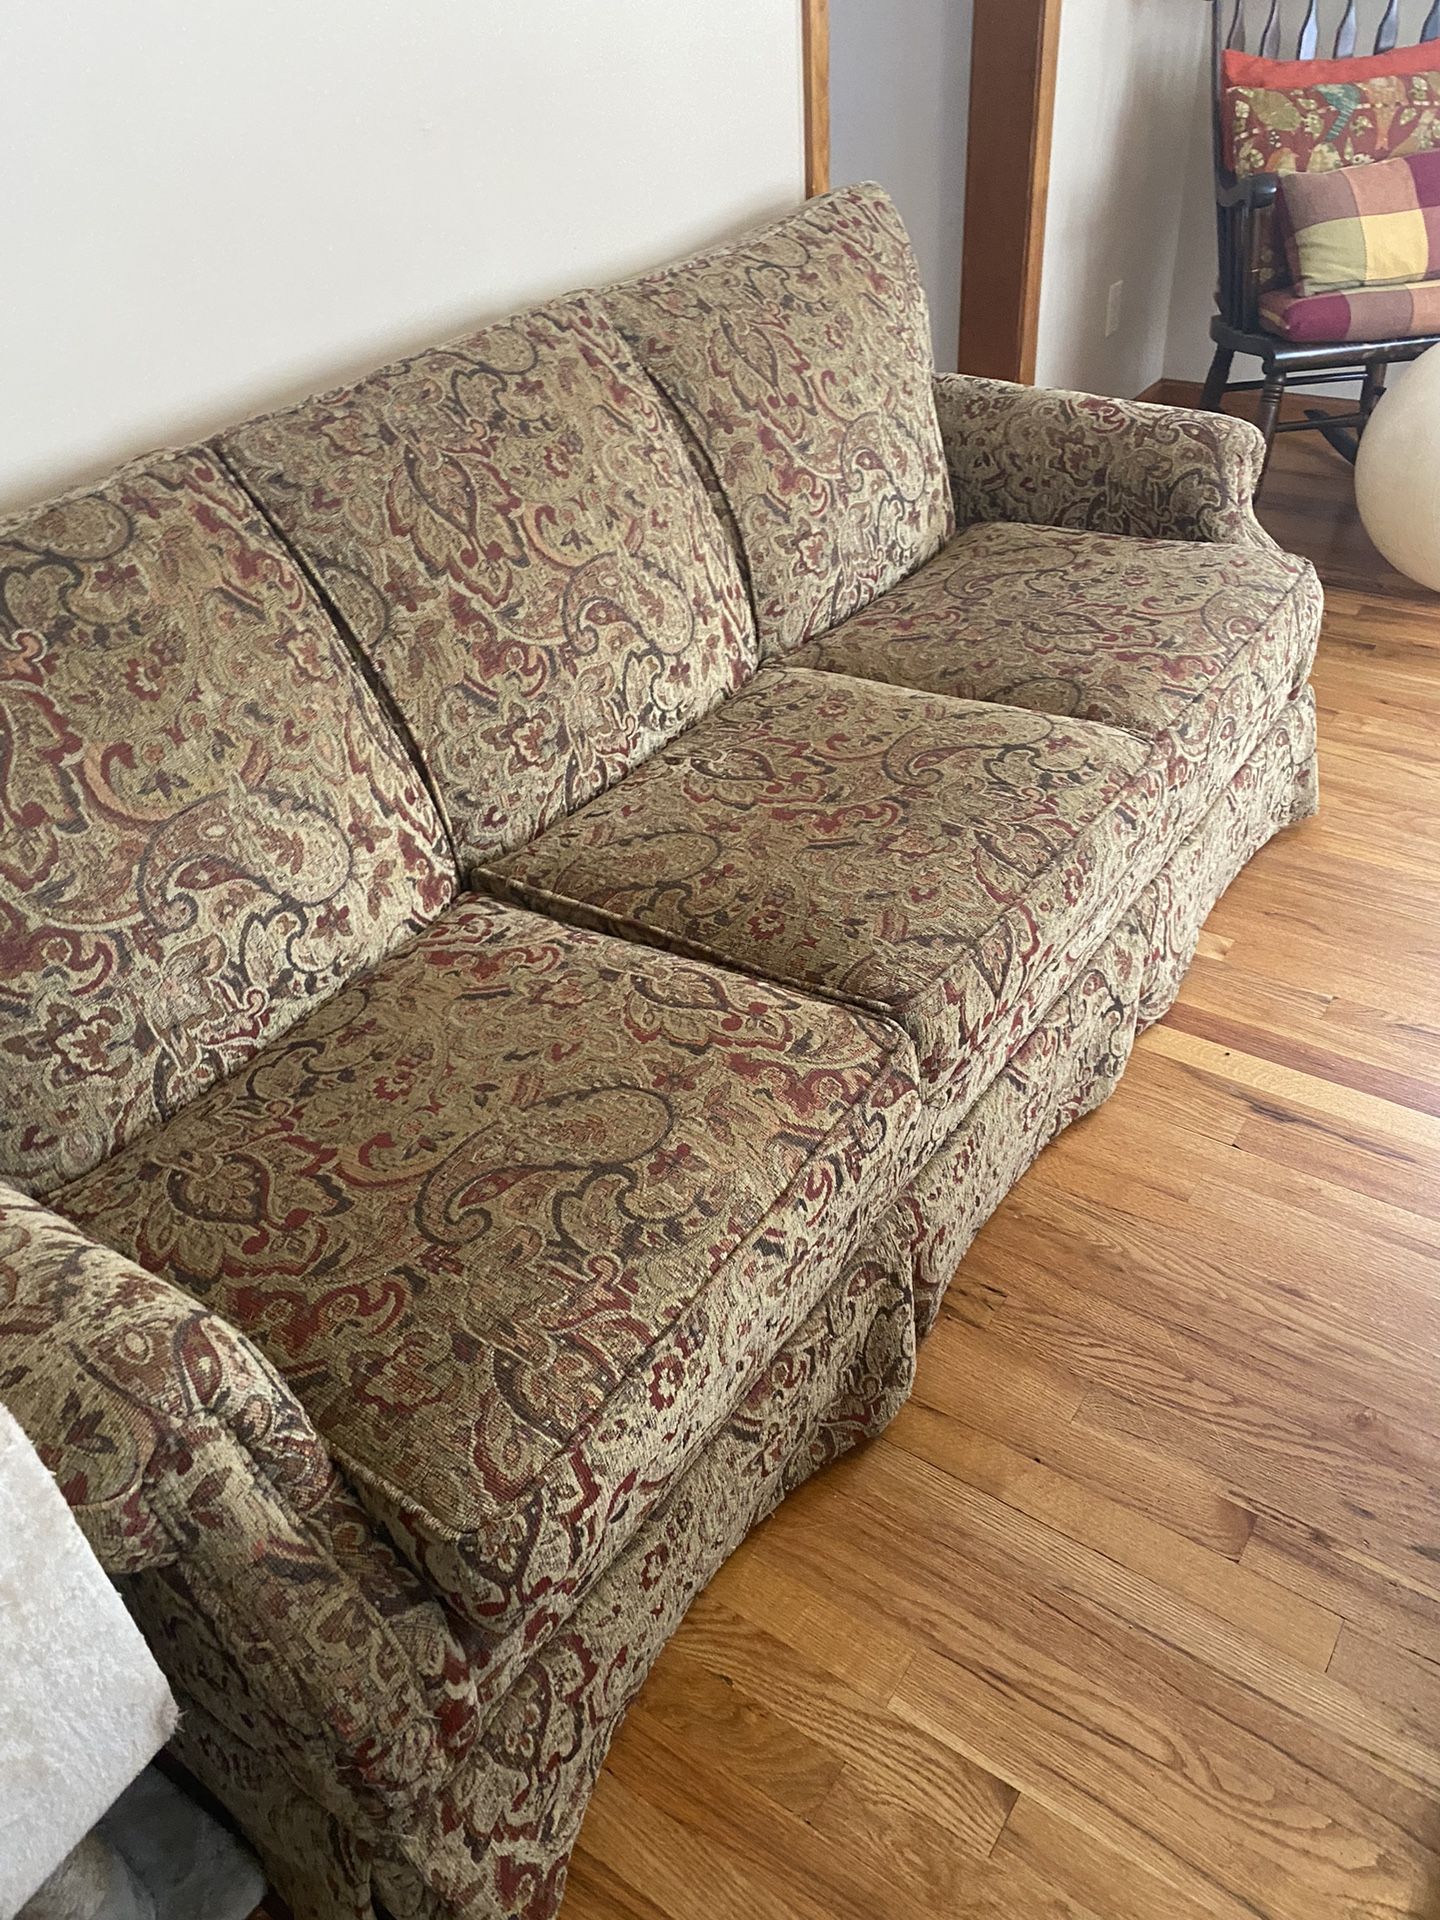 Two Couches Best Offer